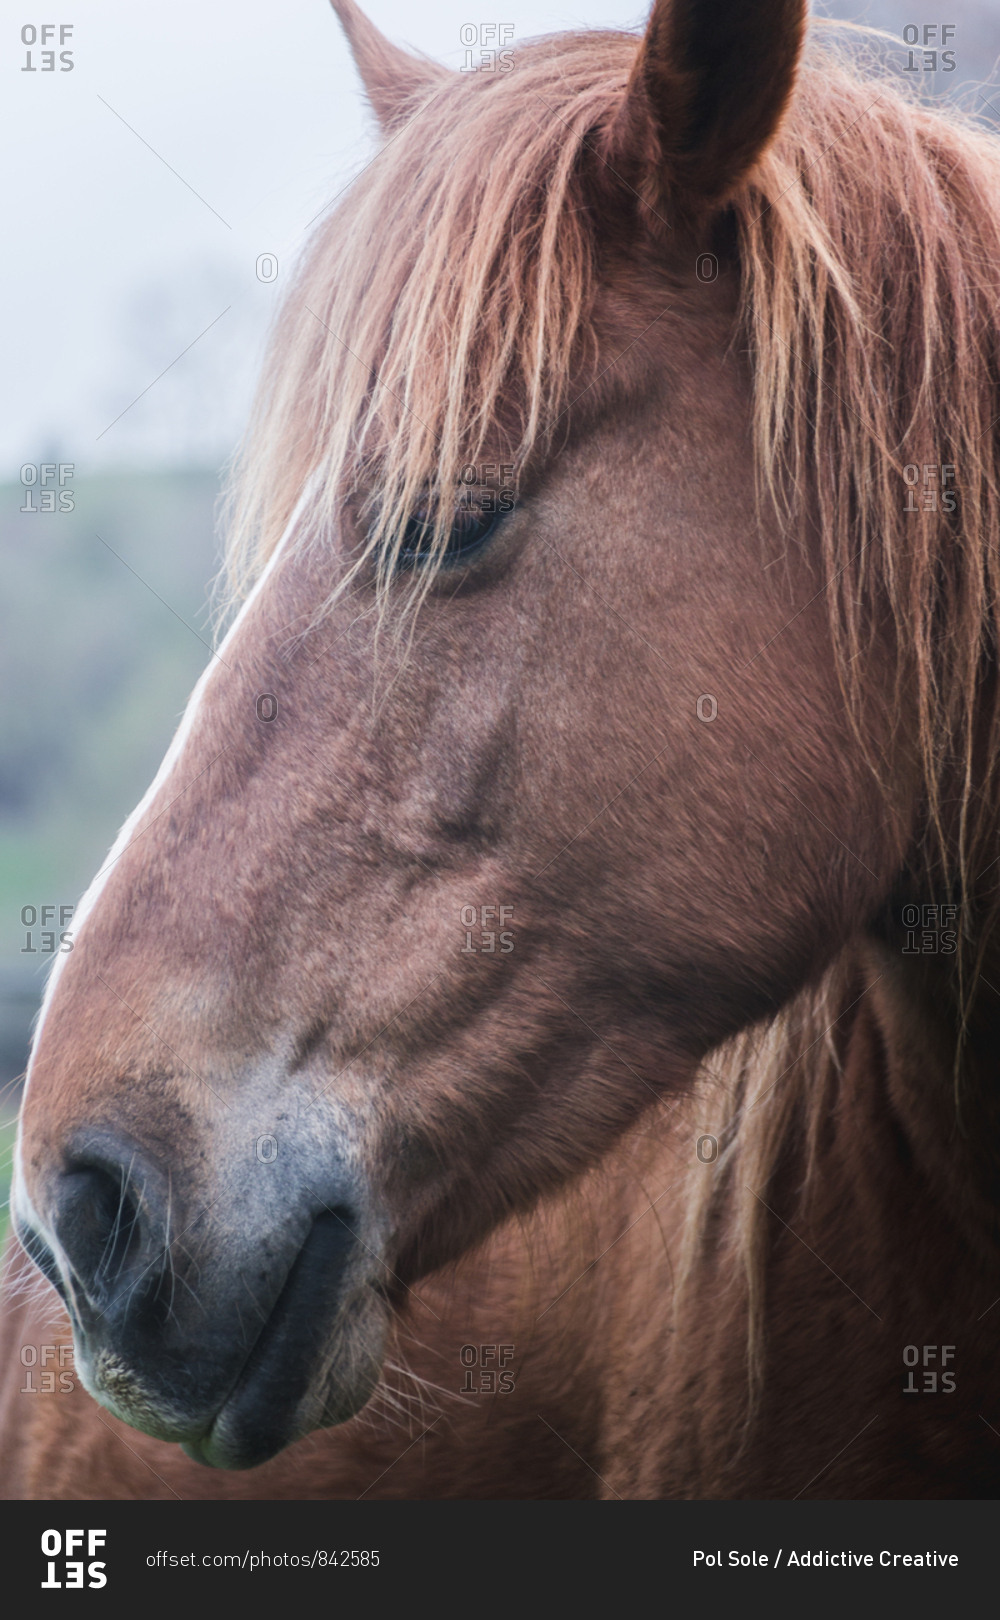 Head of amazing horse with chestnut colored coat standing on blurred background of nature